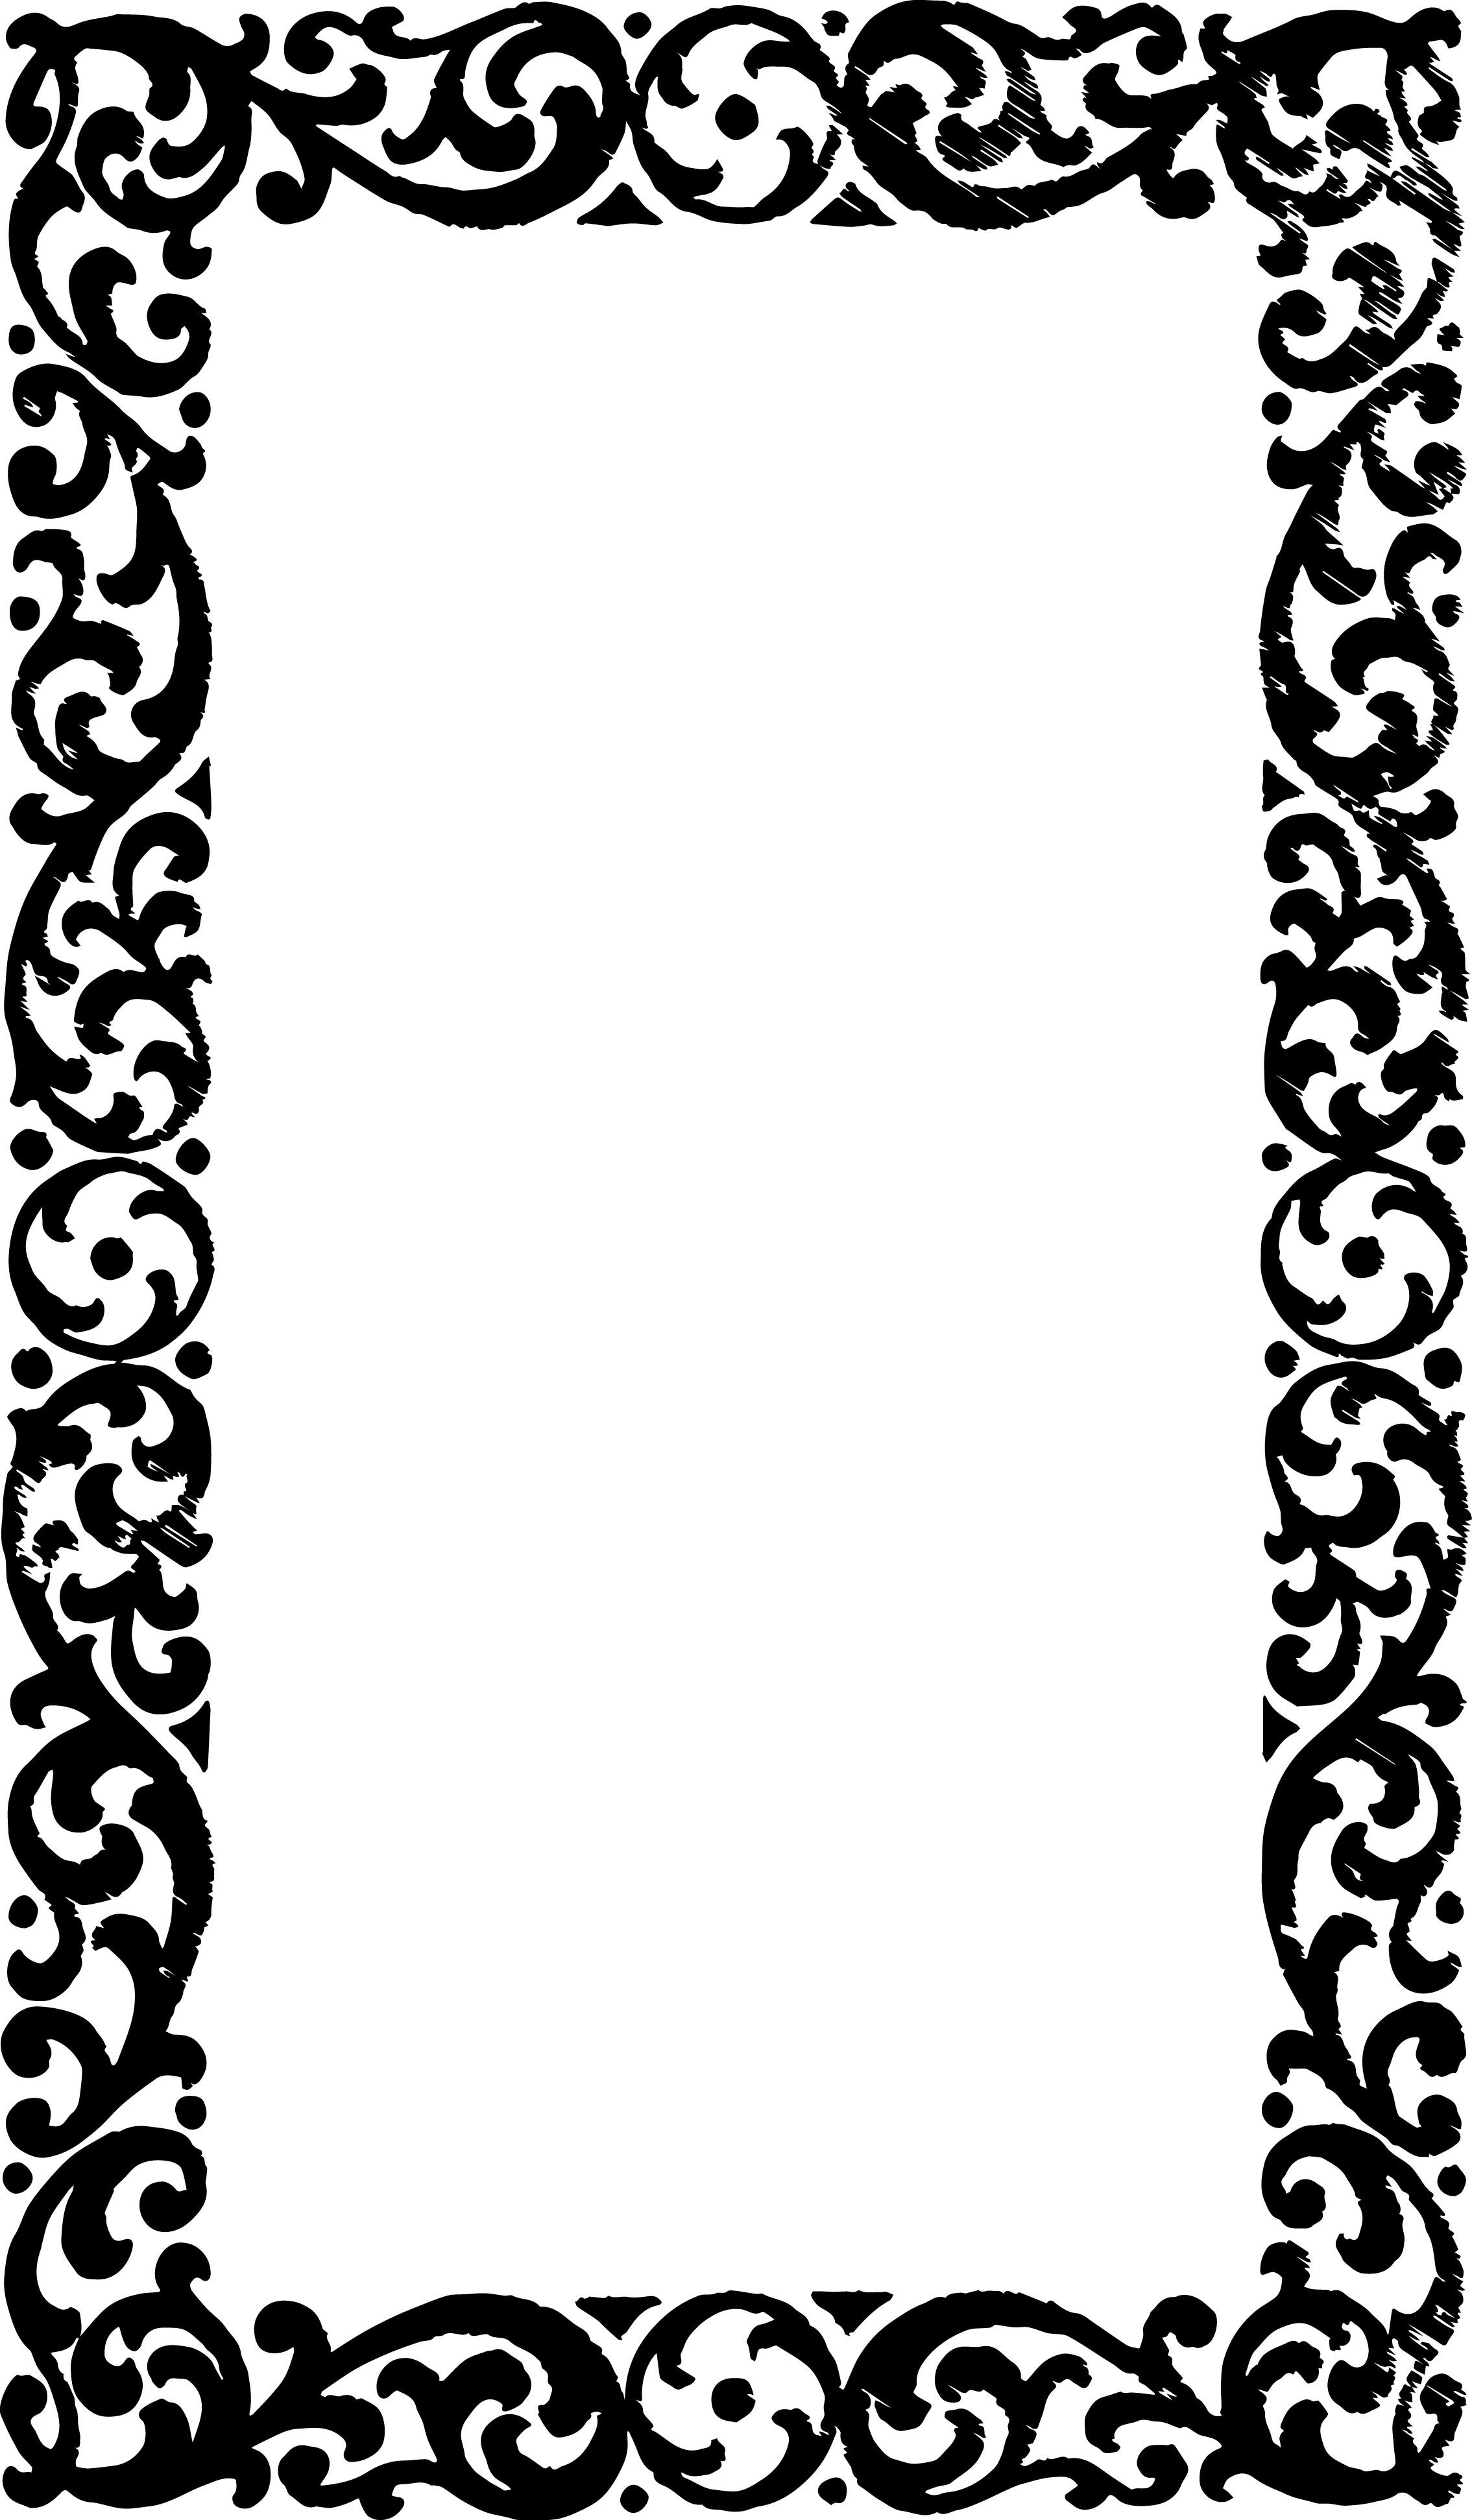 black-and-white-border-clipart-black-and-white-borders-clipartion